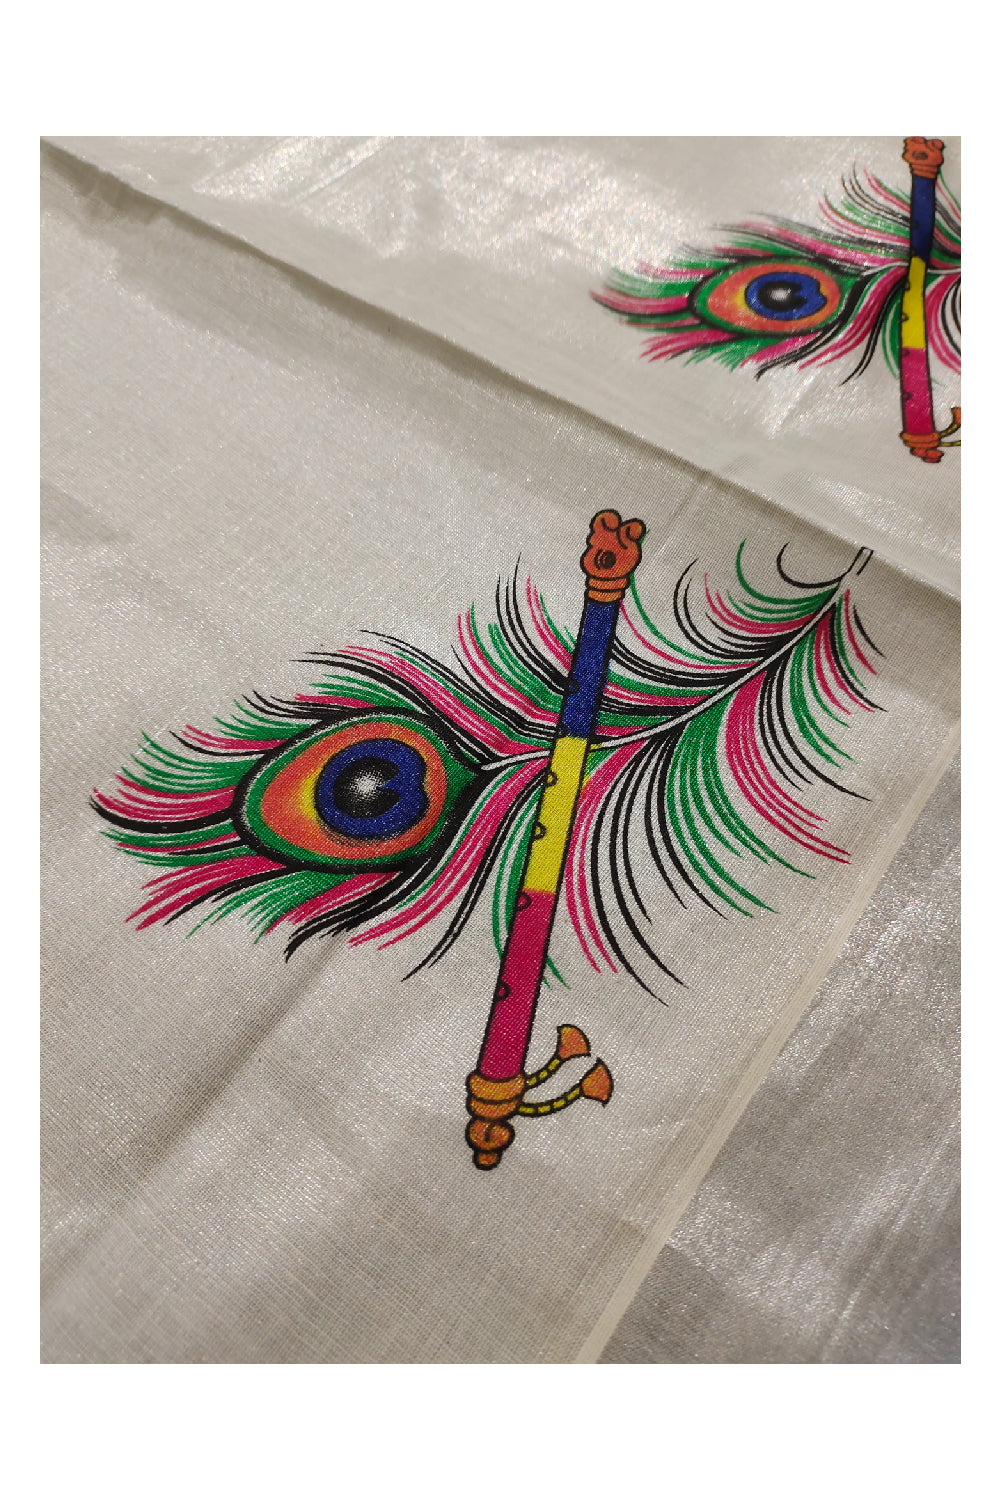 Kerala Silver Tissue Kasavu Onam Saree with Mural Peacock Feather and Flute Design